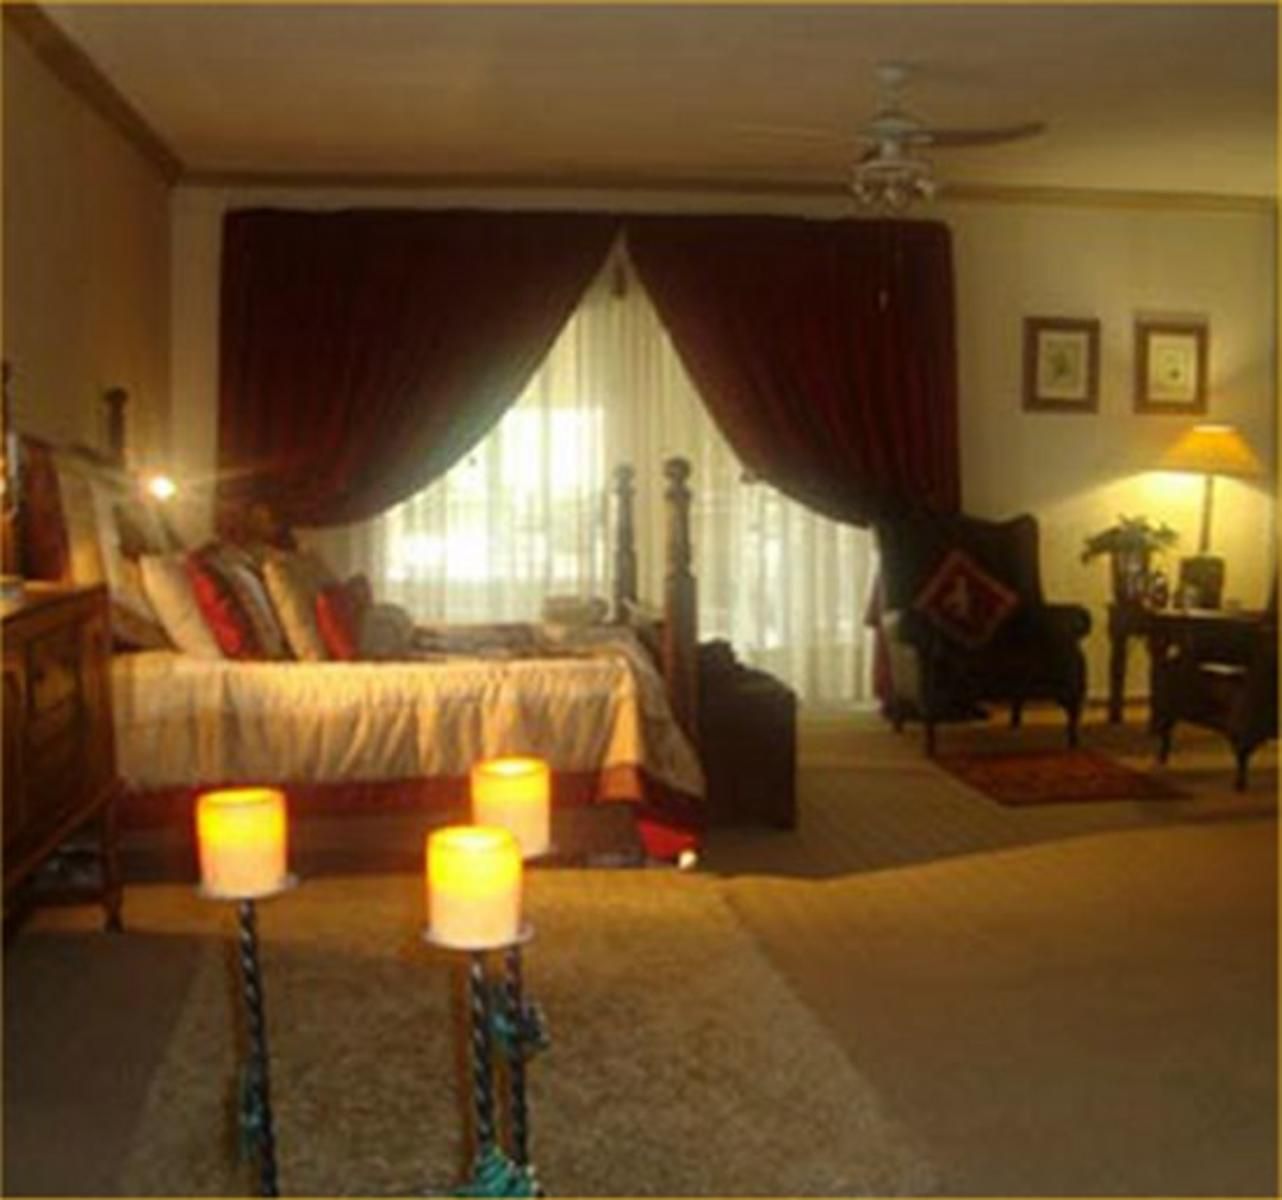 Everwood Guest House Wilkoppies Klerksdorp North West Province South Africa Sepia Tones, Living Room